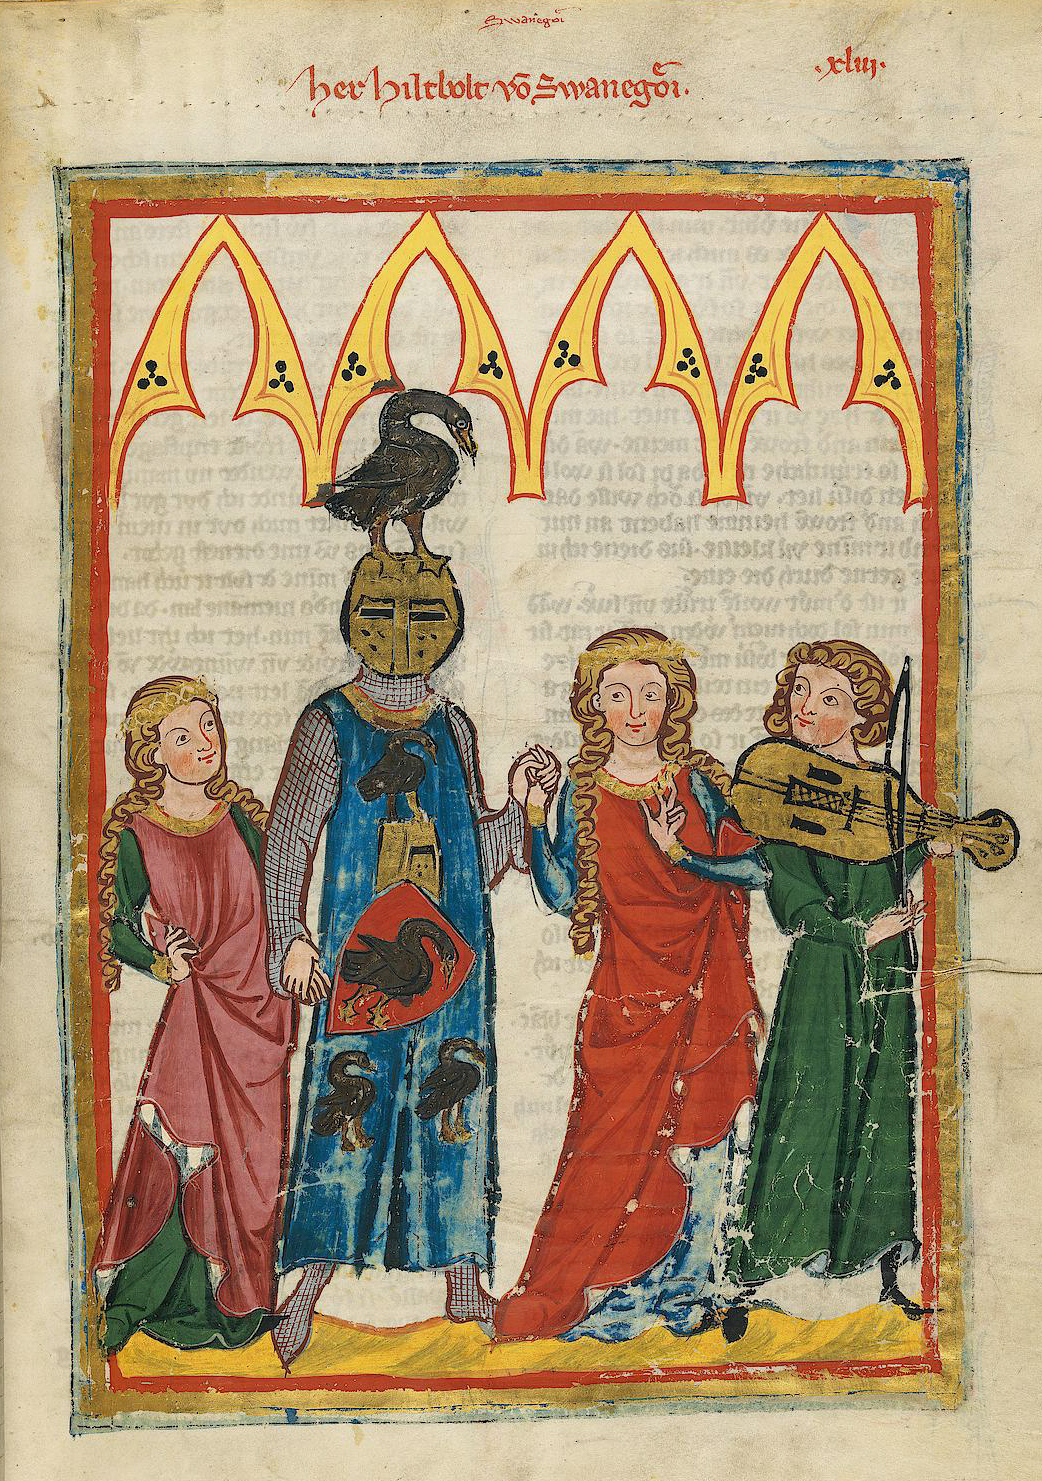 Illustration from Codex Manesse, showing four figures, one with a goose on their head